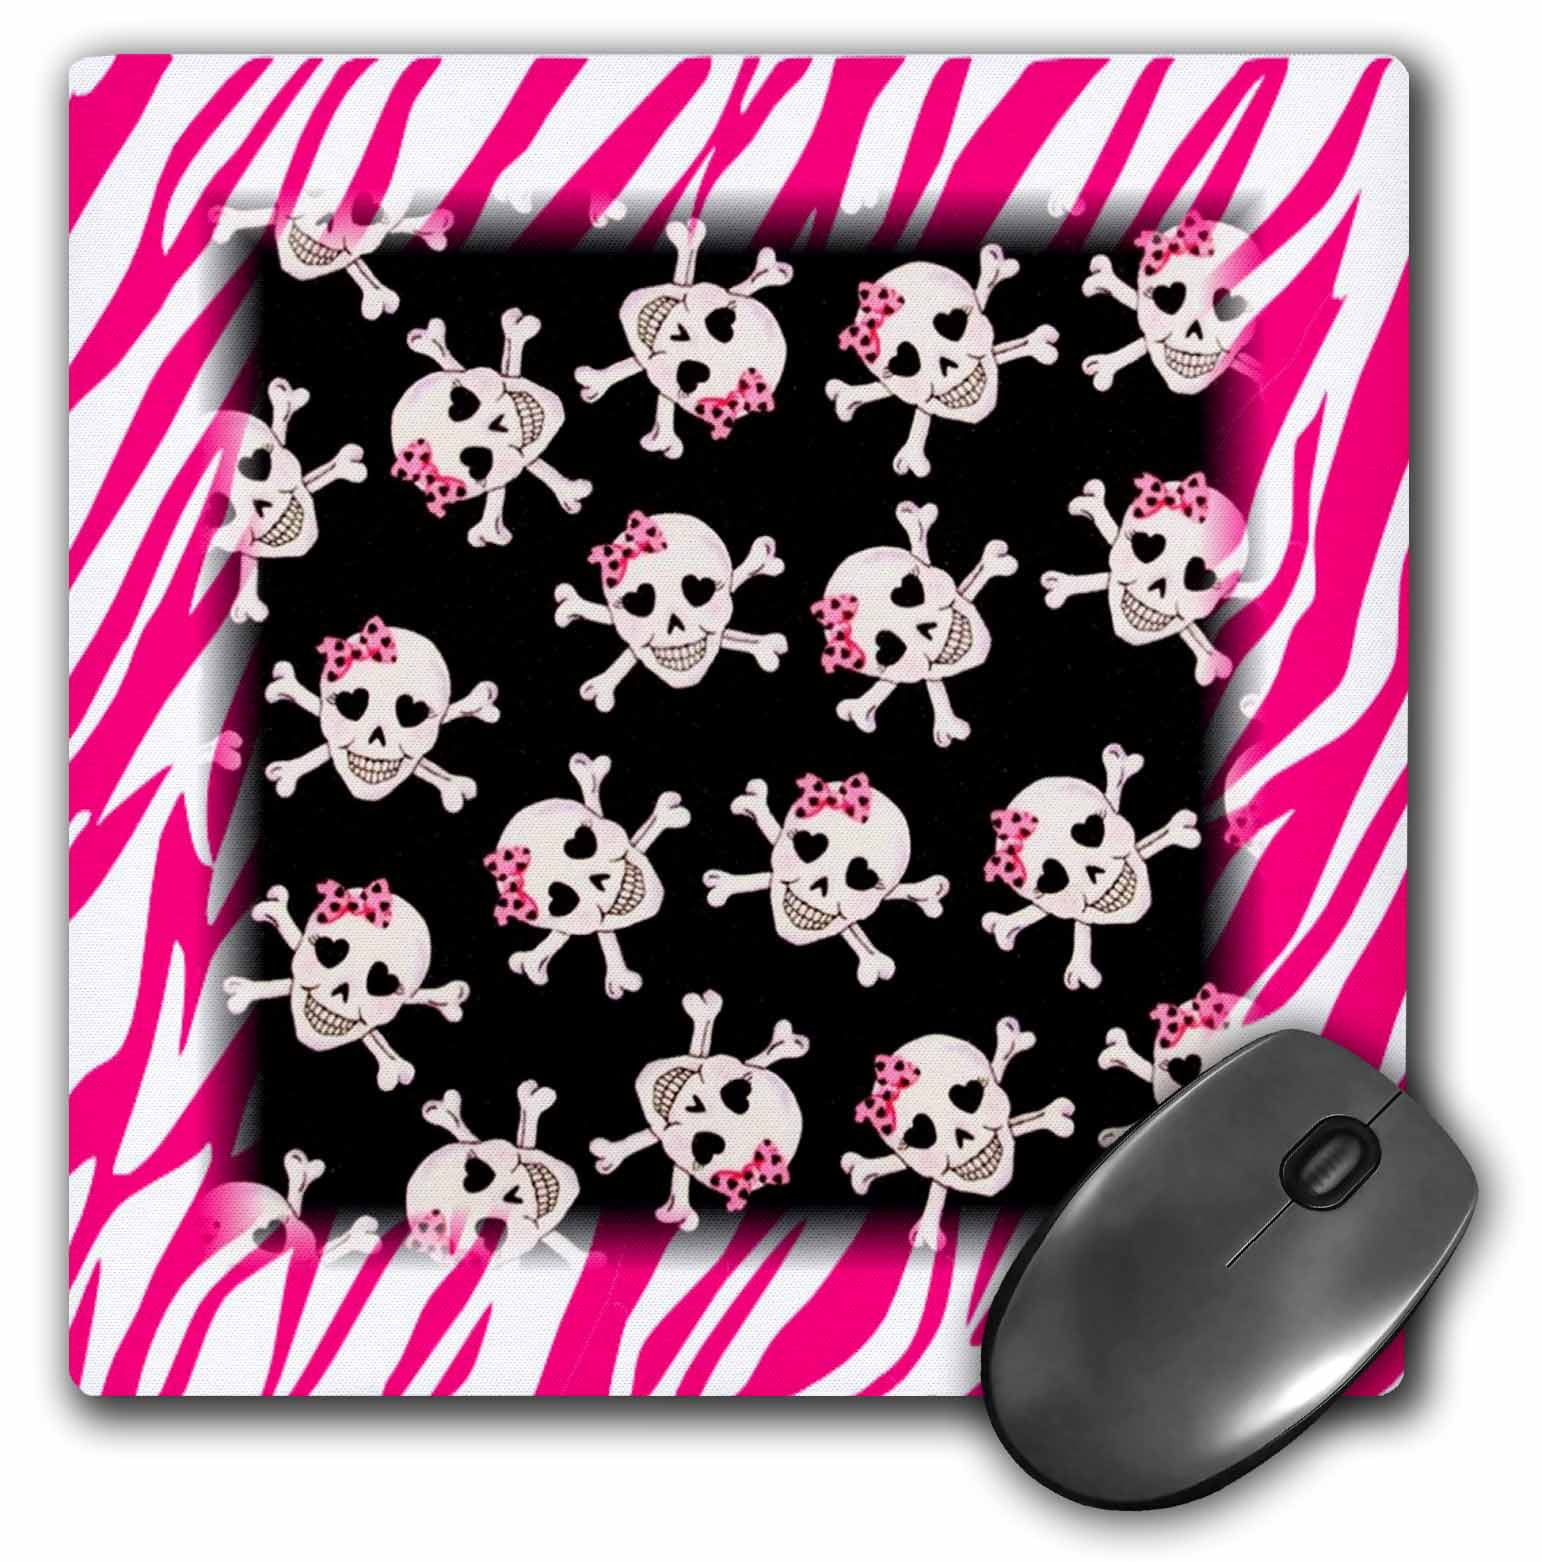 Set of 8 3dRose cst_61793_2 Cute Black Skulls with Bows on Pink Zebra-Soft Coasters